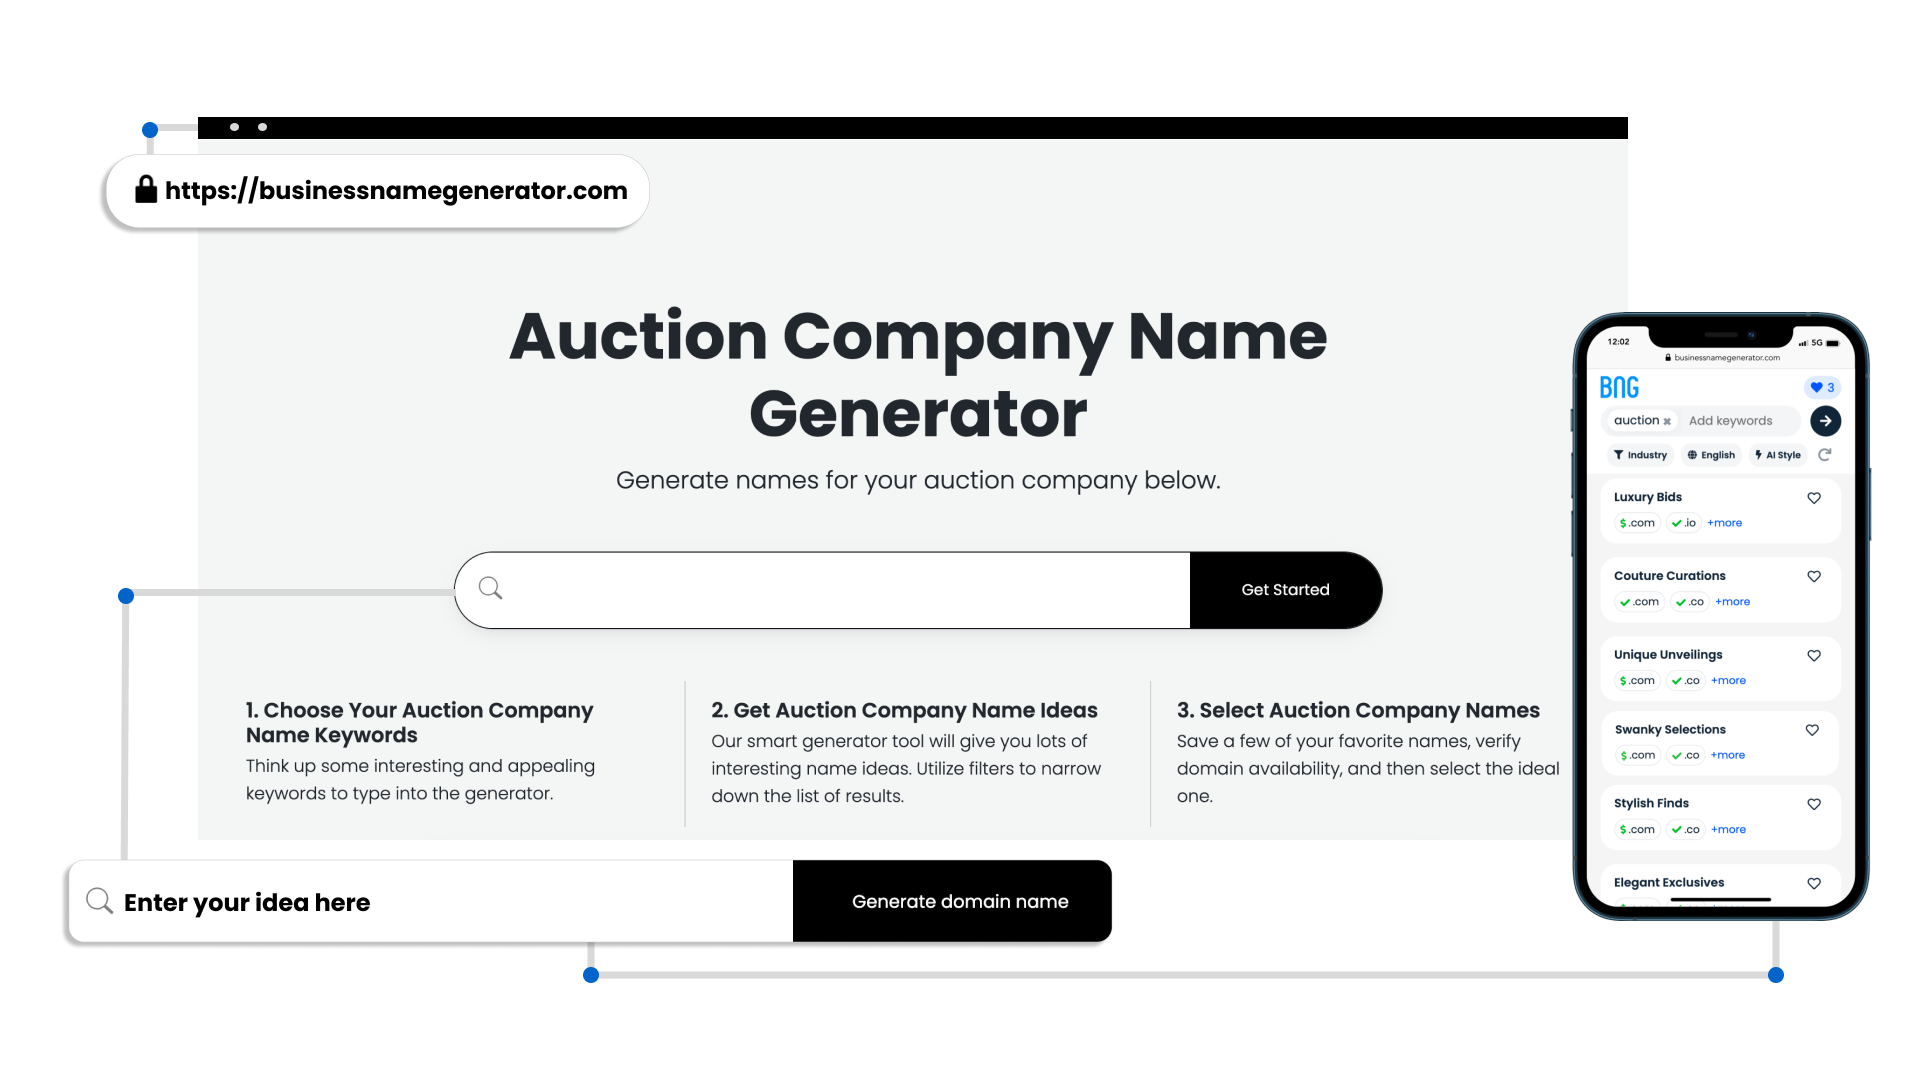 Benefits of Our Auction Company Name Generator